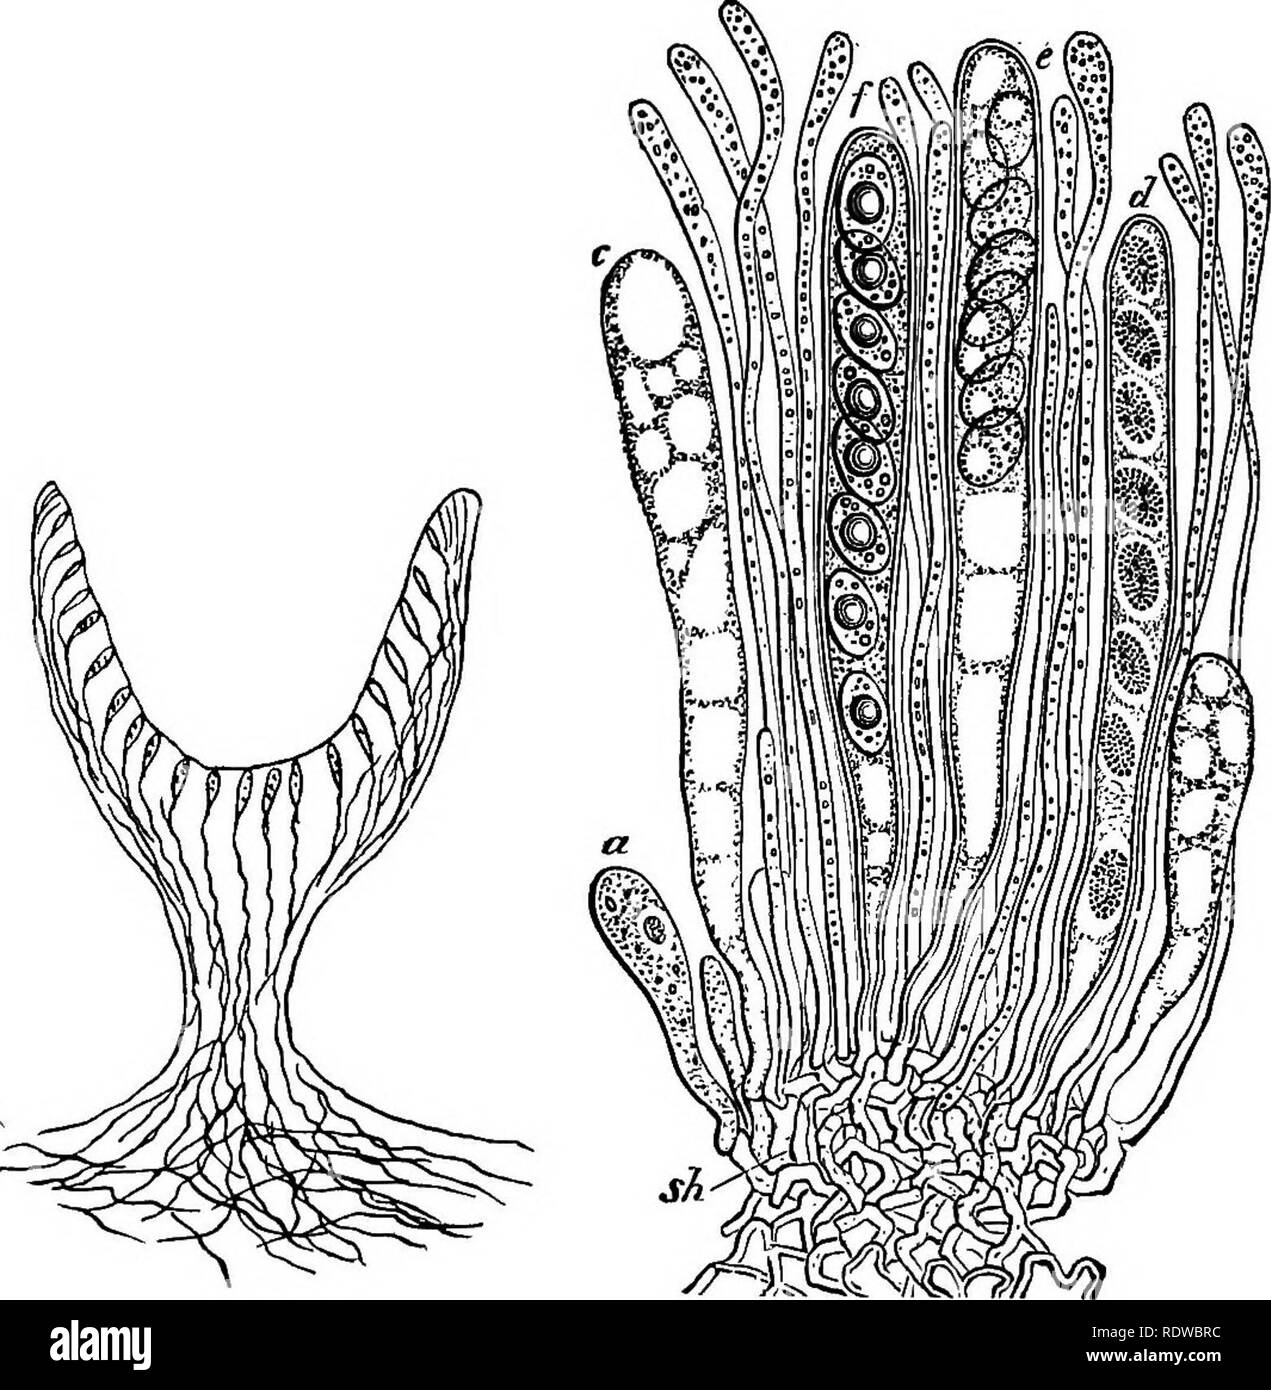 . The essentials of botany. Botany. 162 BOTANY. the size and form of tLe spore-fruit. Some of the filaments of the spore-fruit become enlarged into sacs in which spores are developed (Fig. 88), while the others make up the sterile. Fio- 87. Fig. 88. Fia. 87.—Diagrammatic vertical section of a Cup-fungus, showing position o( the spore-sacs. Fig. 88.—a few spore-sacs of a Cup-fungus (Peziza oonvexula). in various stages of development, a, youngest, to/, oldest. The slender filaments (paraphyses) belong to the sterile tissue. Magnified 550 times. or protective tissue. The epore-sacs grow so that  Stock Photo